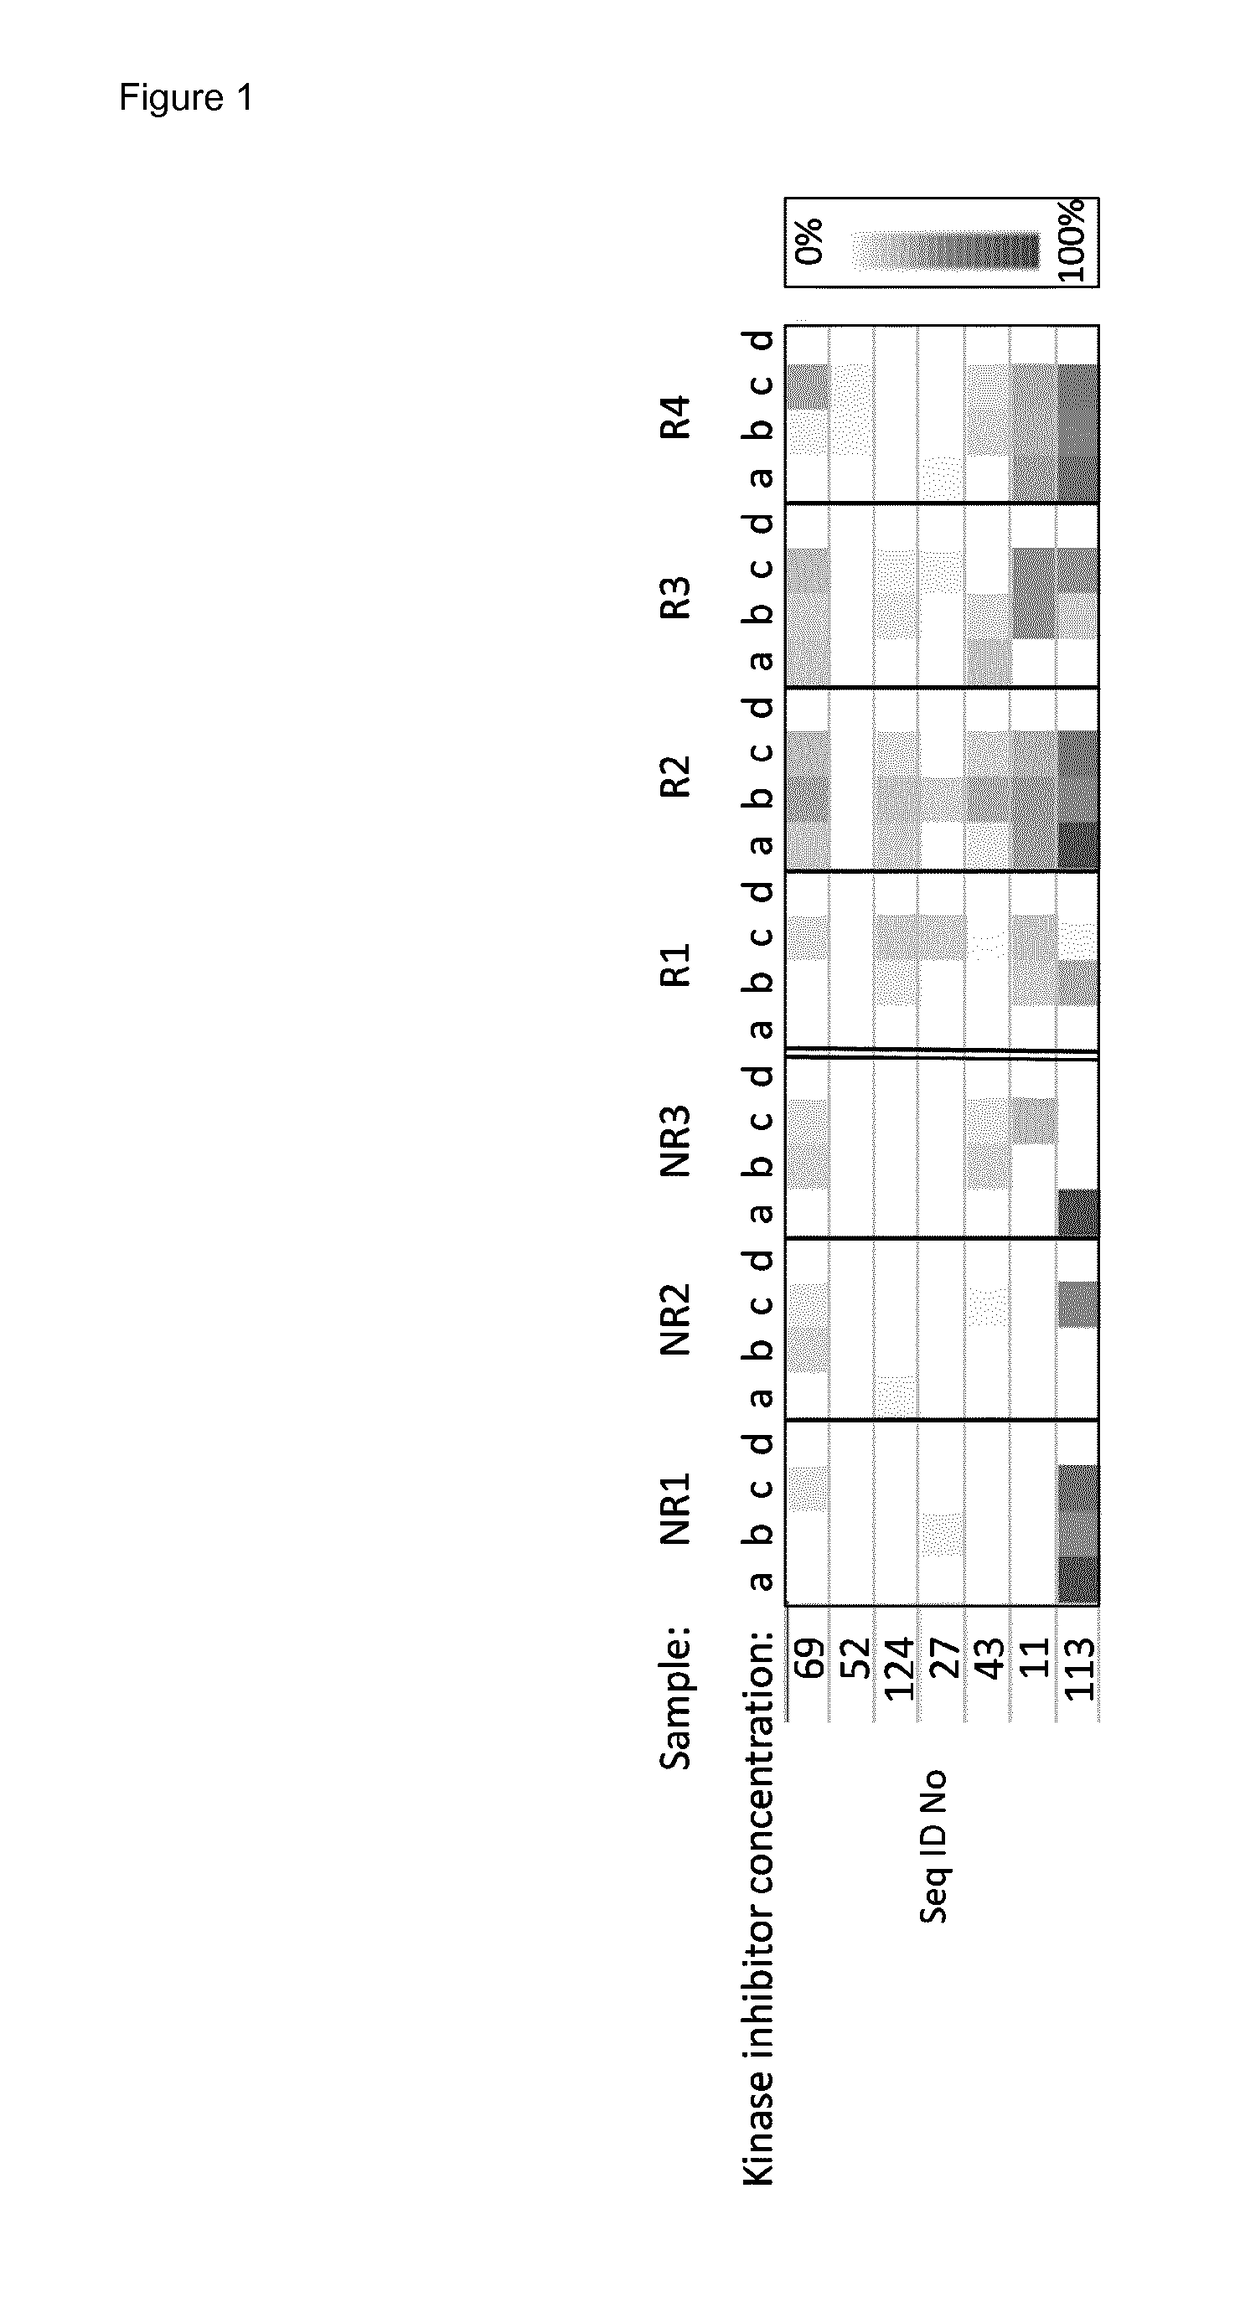 Method for predicting the response of melanoma patients to targeted pharmacotherapy